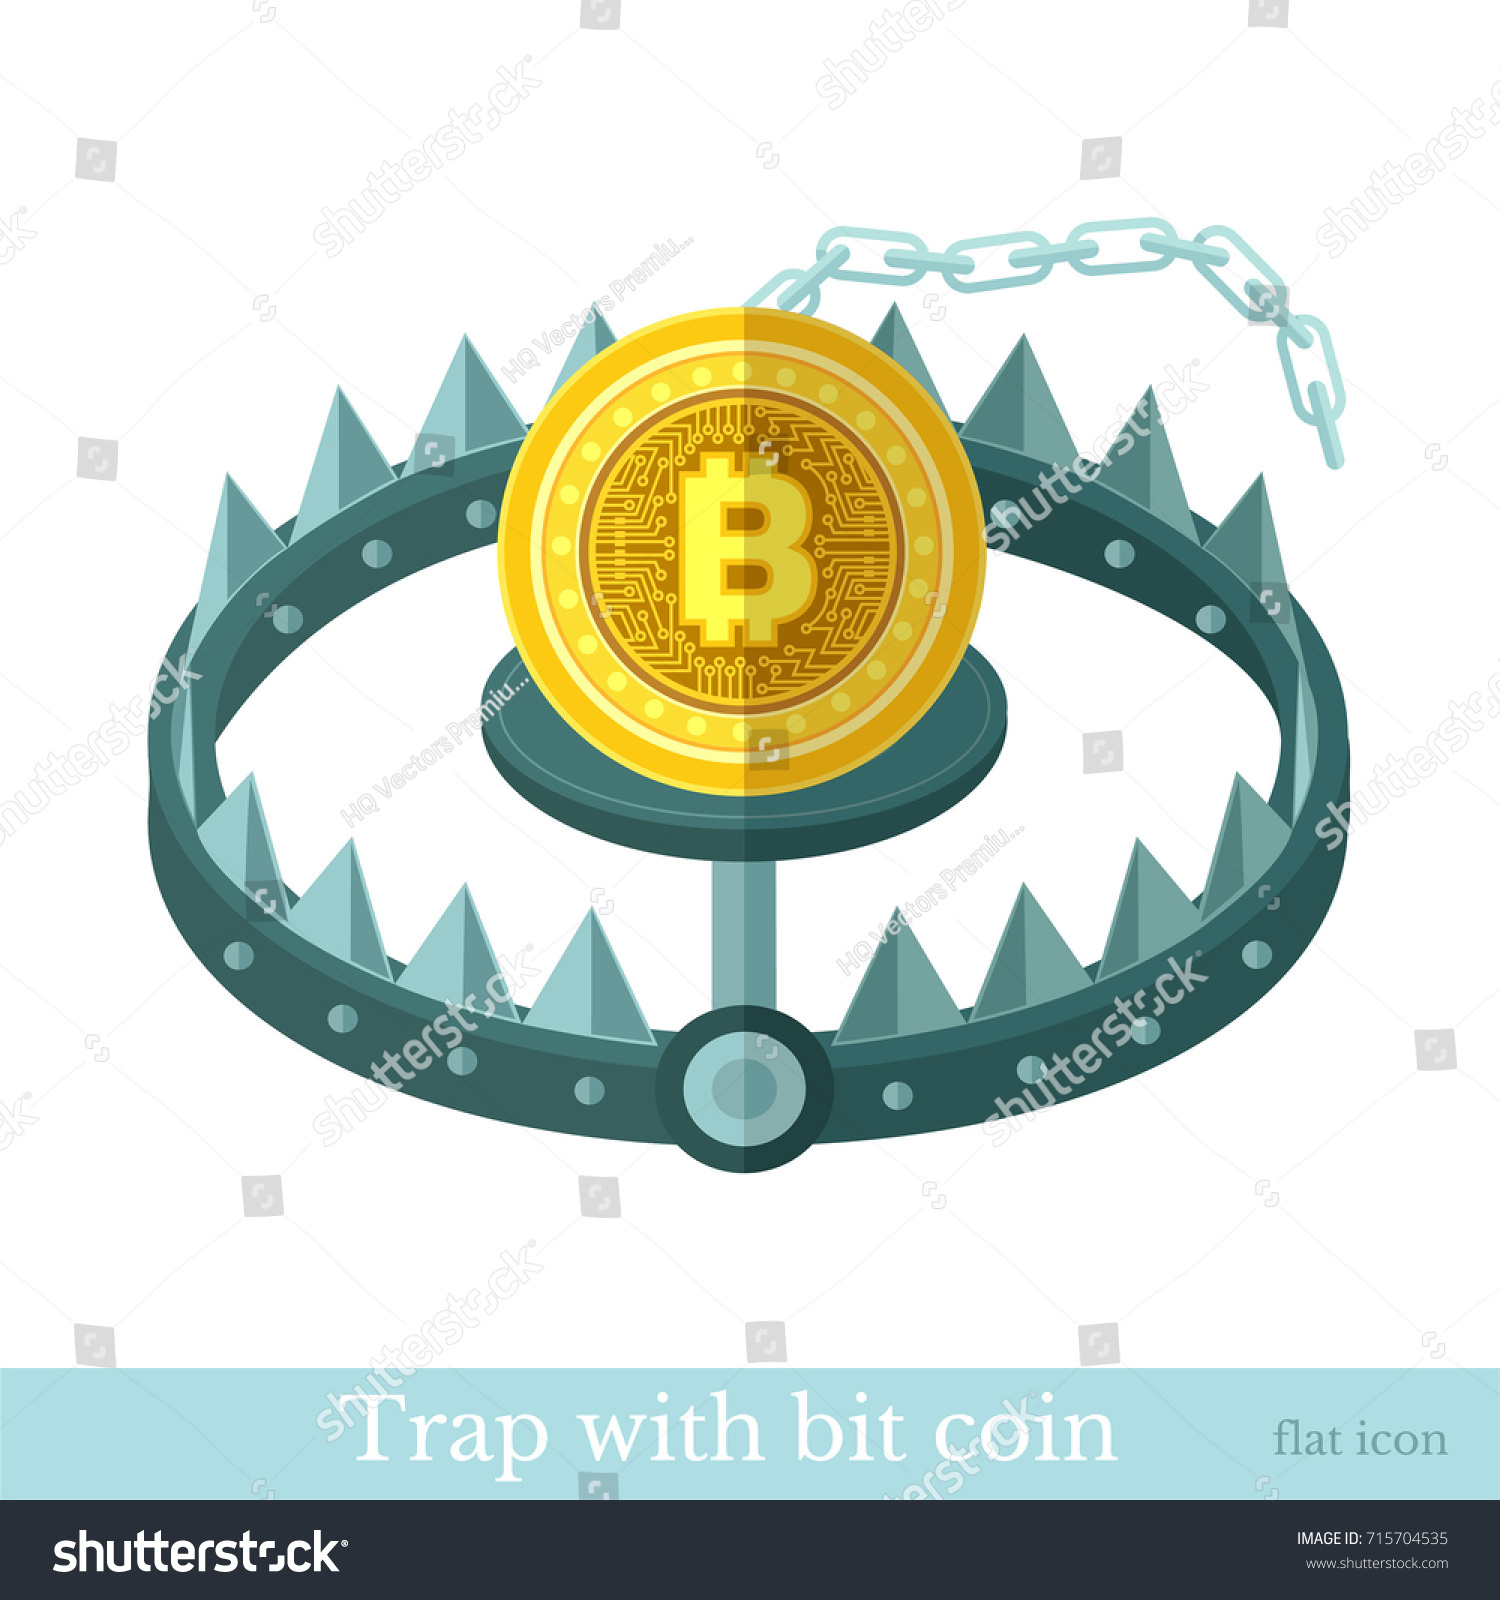 SVG of Flat icon with bit coin lay on the trap. Mining bit coin business illustration isolated on white svg